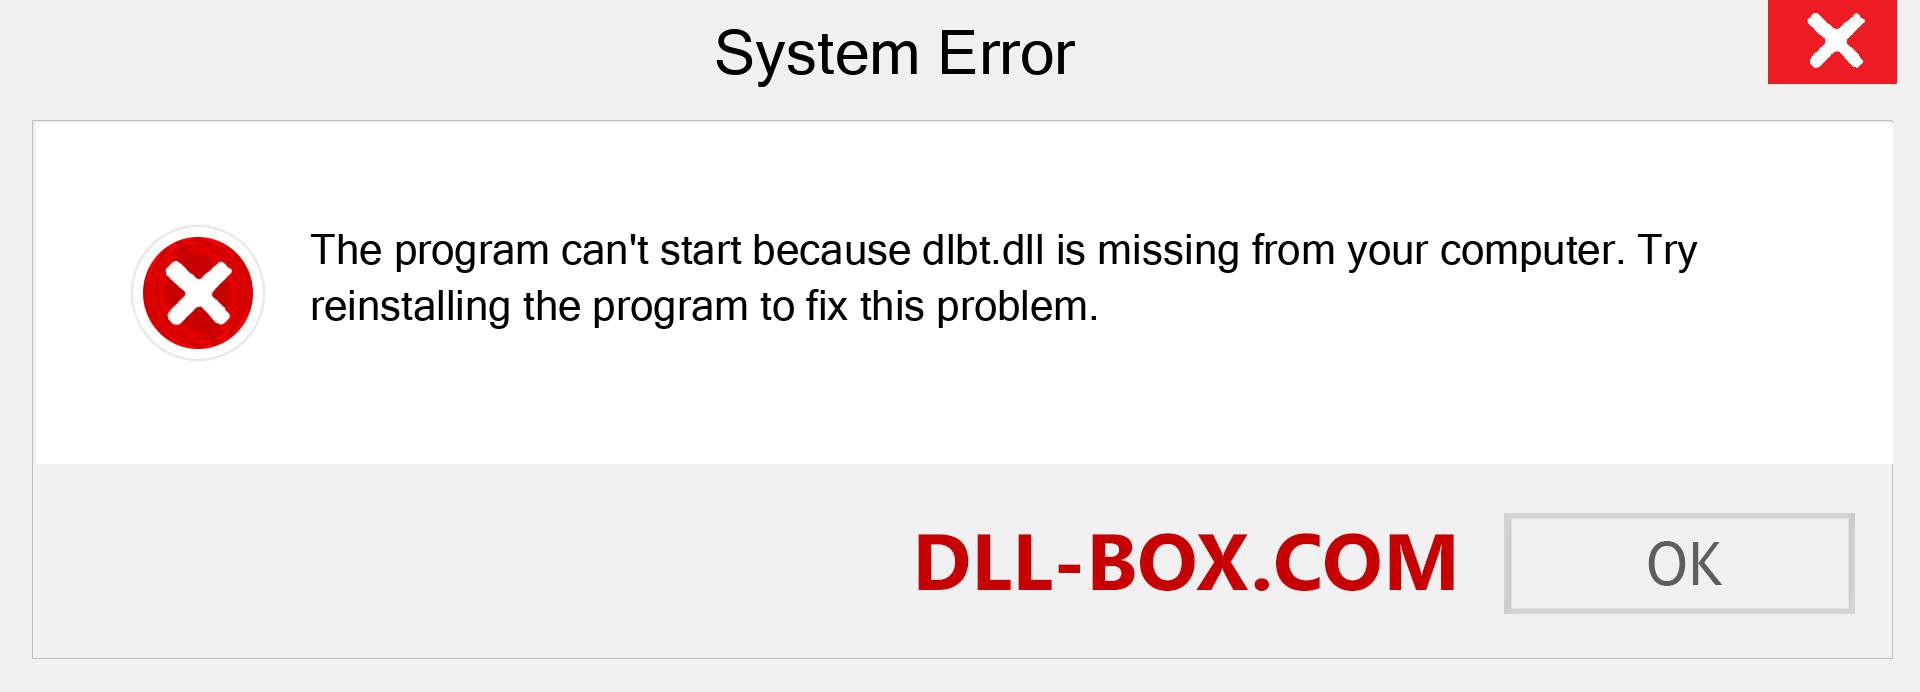  dlbt.dll file is missing?. Download for Windows 7, 8, 10 - Fix  dlbt dll Missing Error on Windows, photos, images